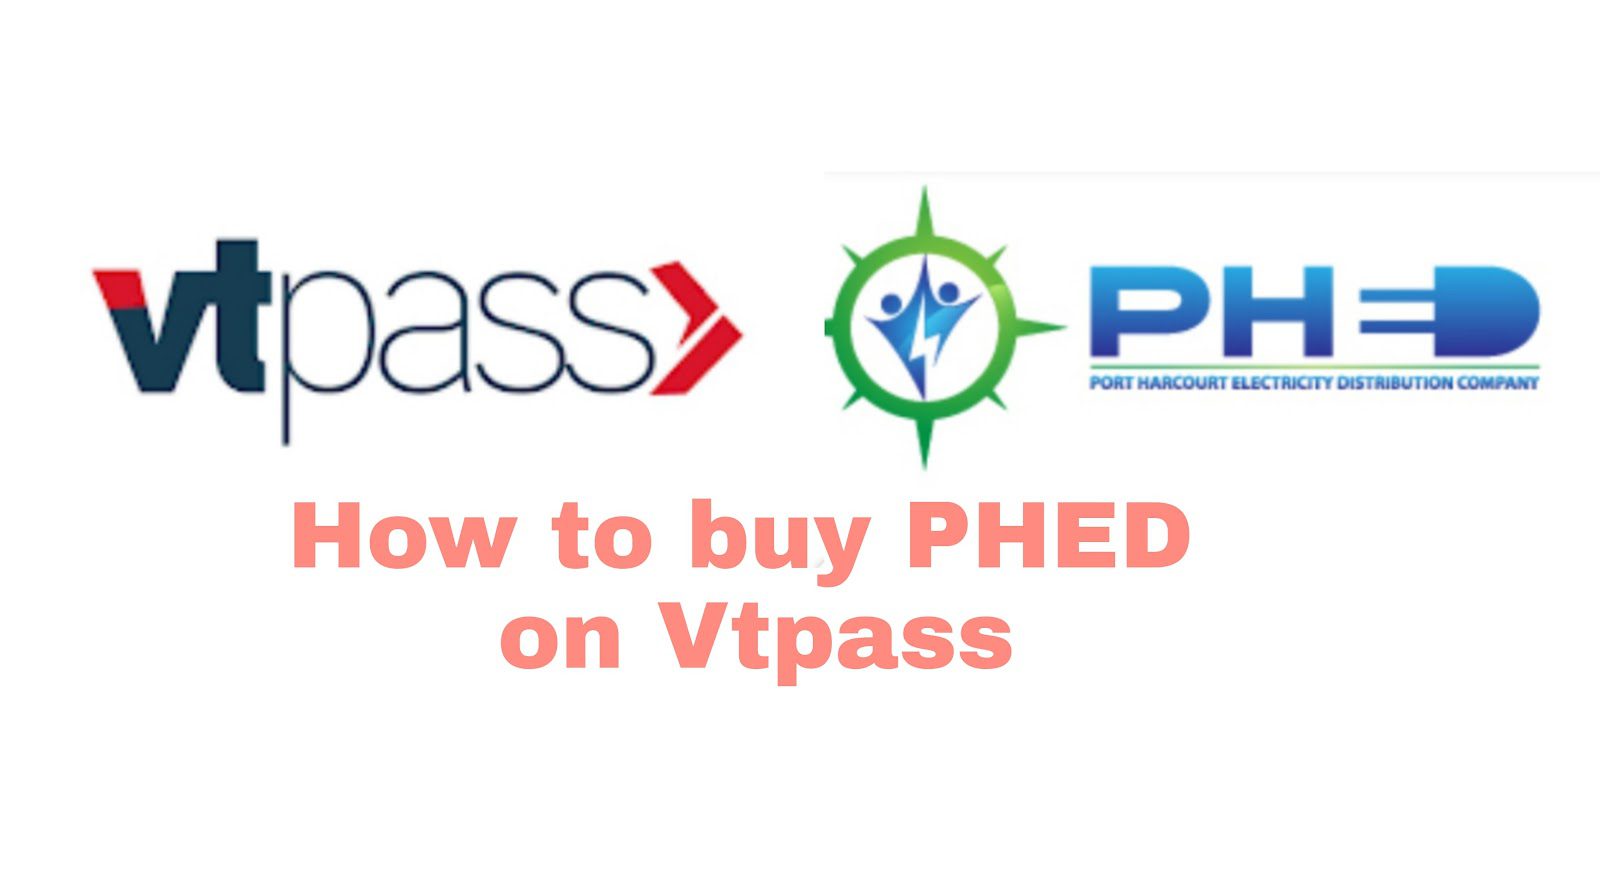 Vtpass PHED; How To Pay For PHED On Vtpass